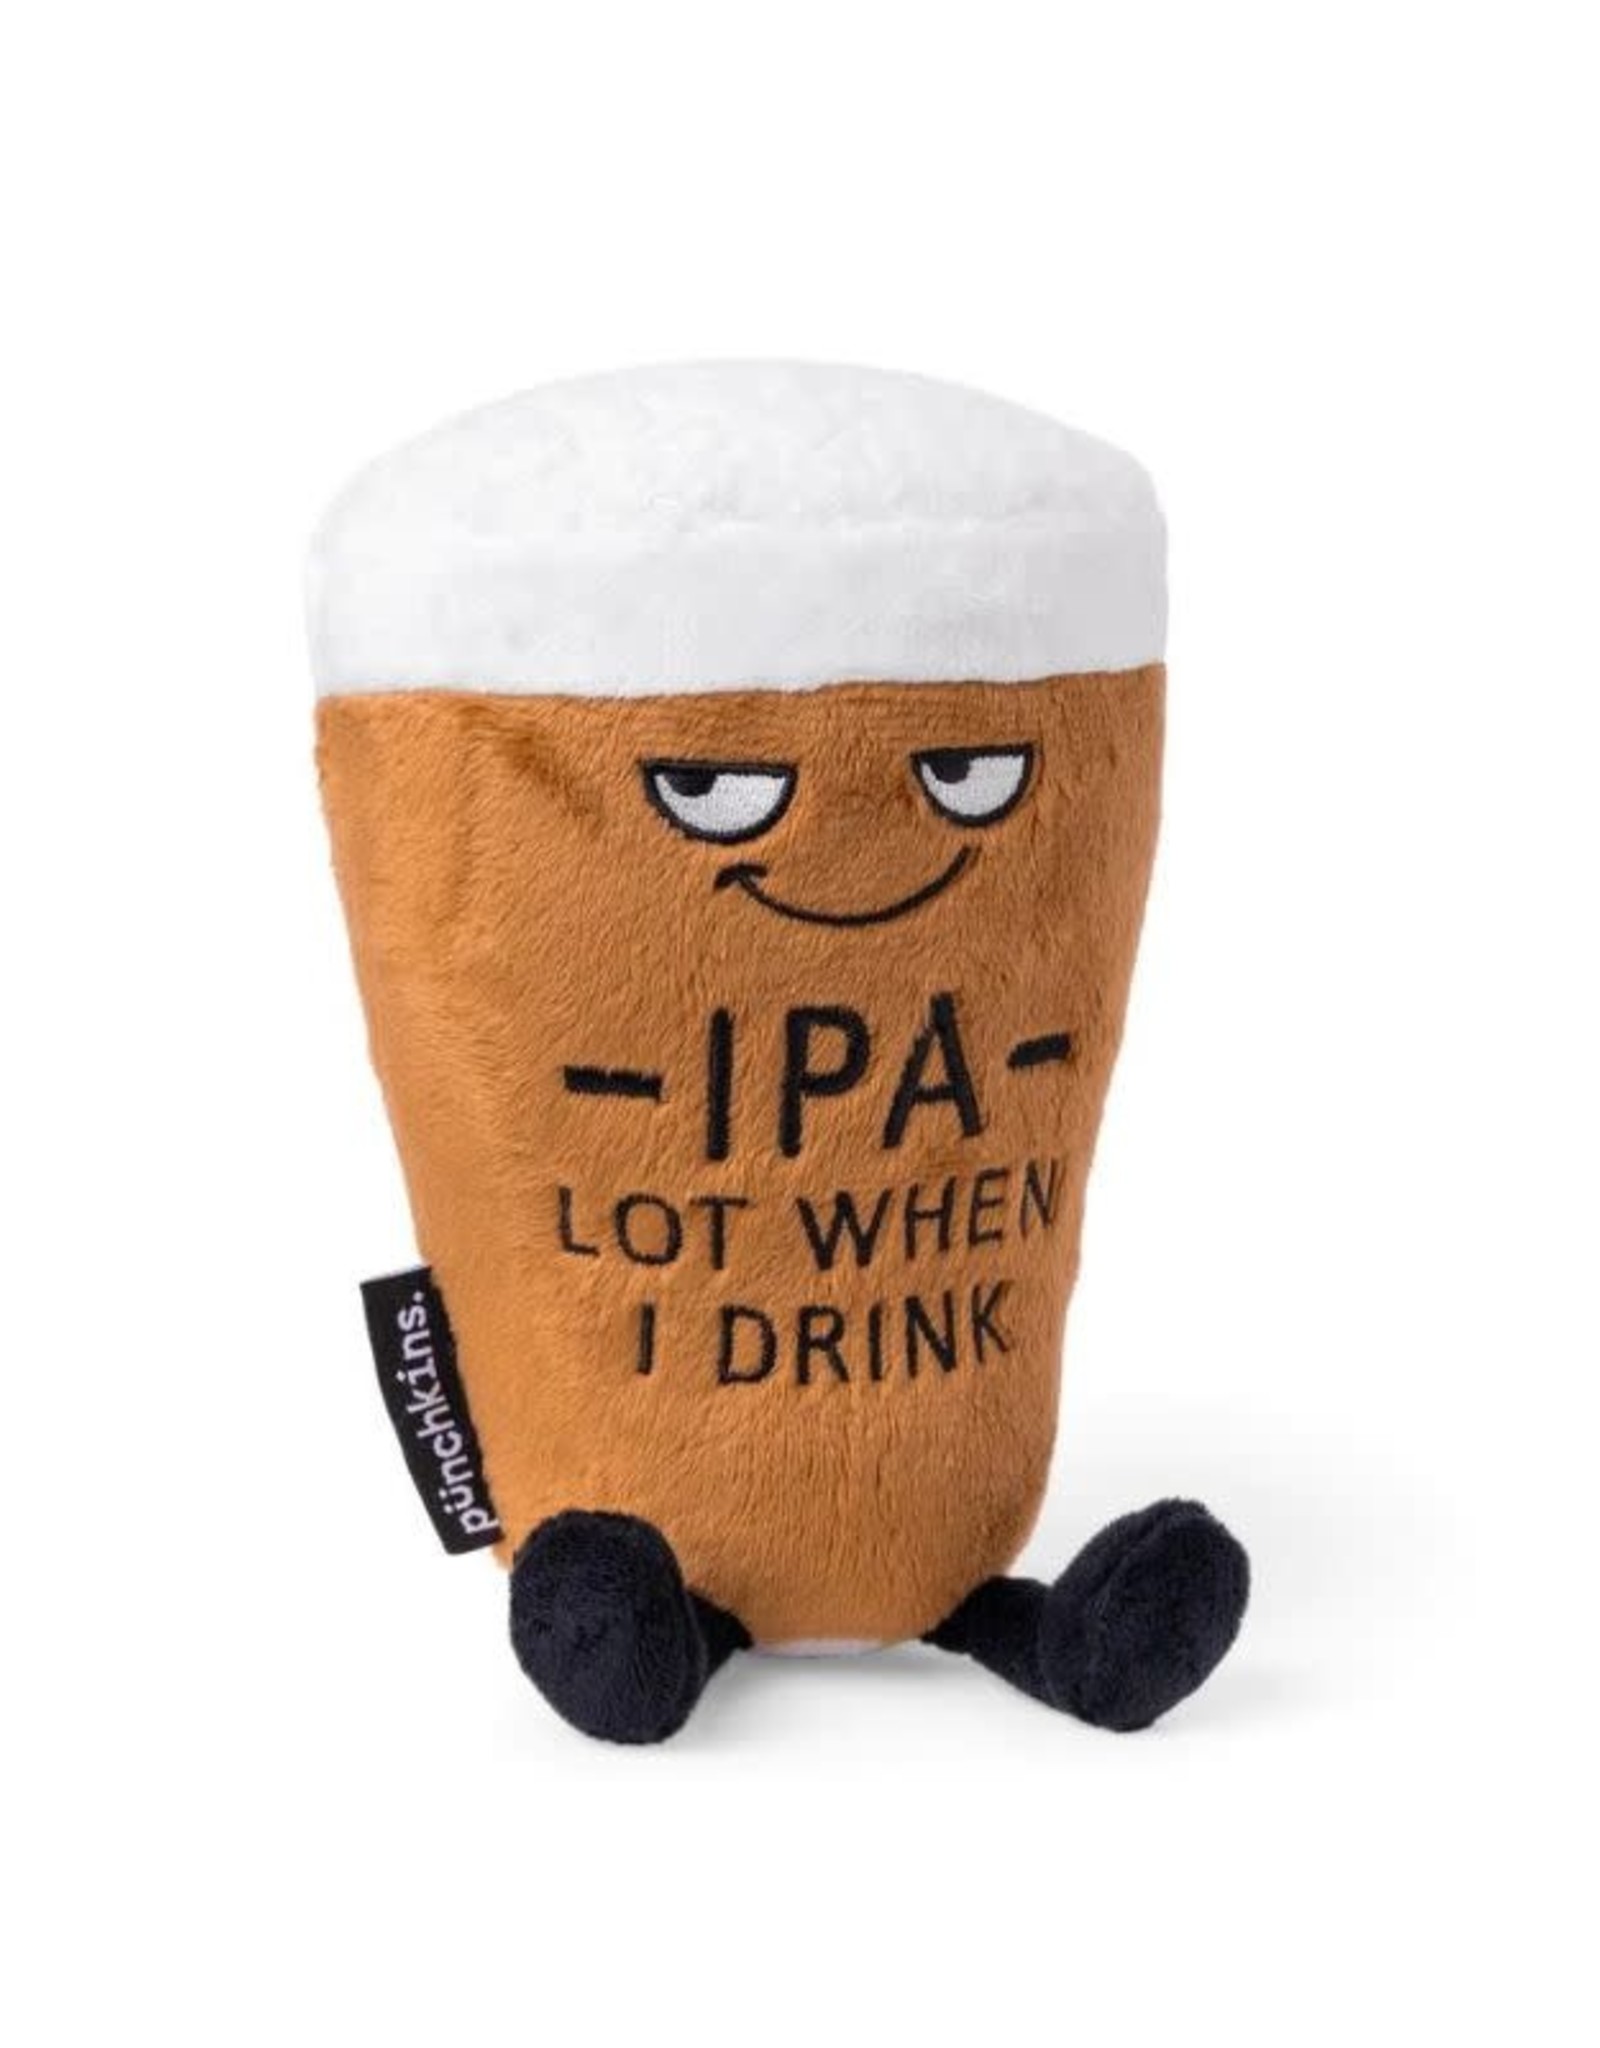 Punchkins IPA - Lot When I Drink